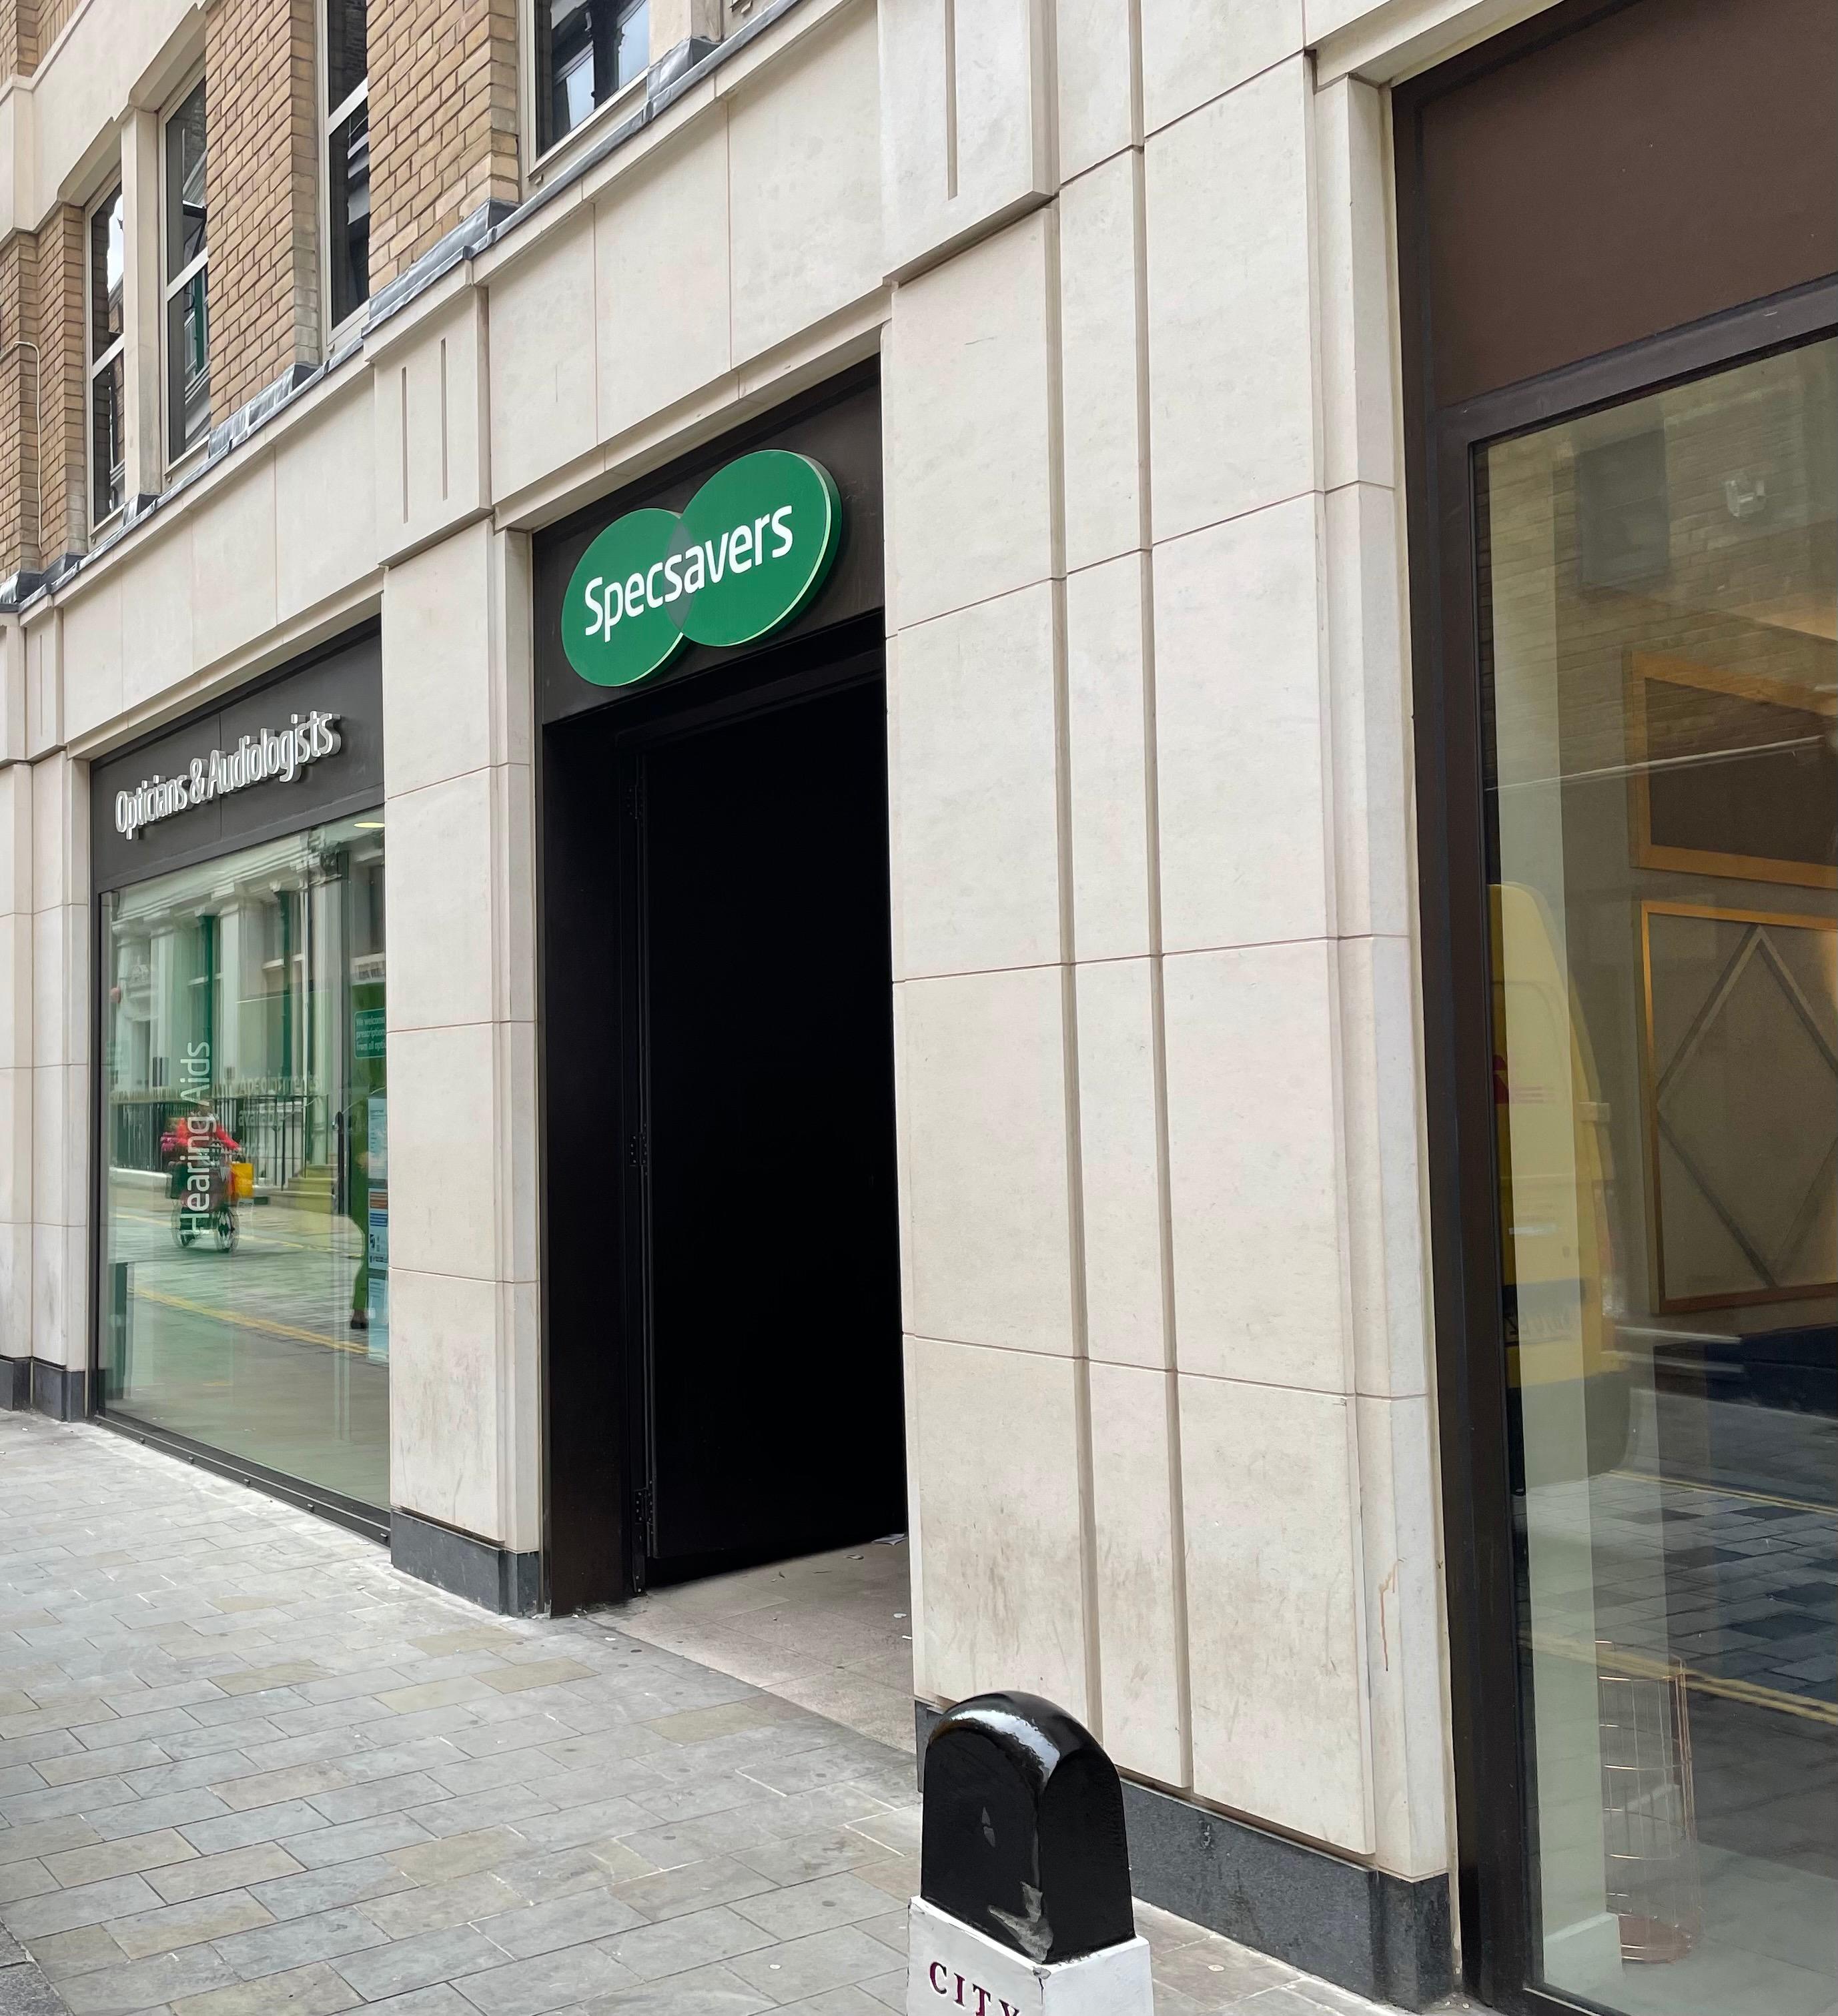 Images Specsavers Opticians and Audiologists - Liverpool Street